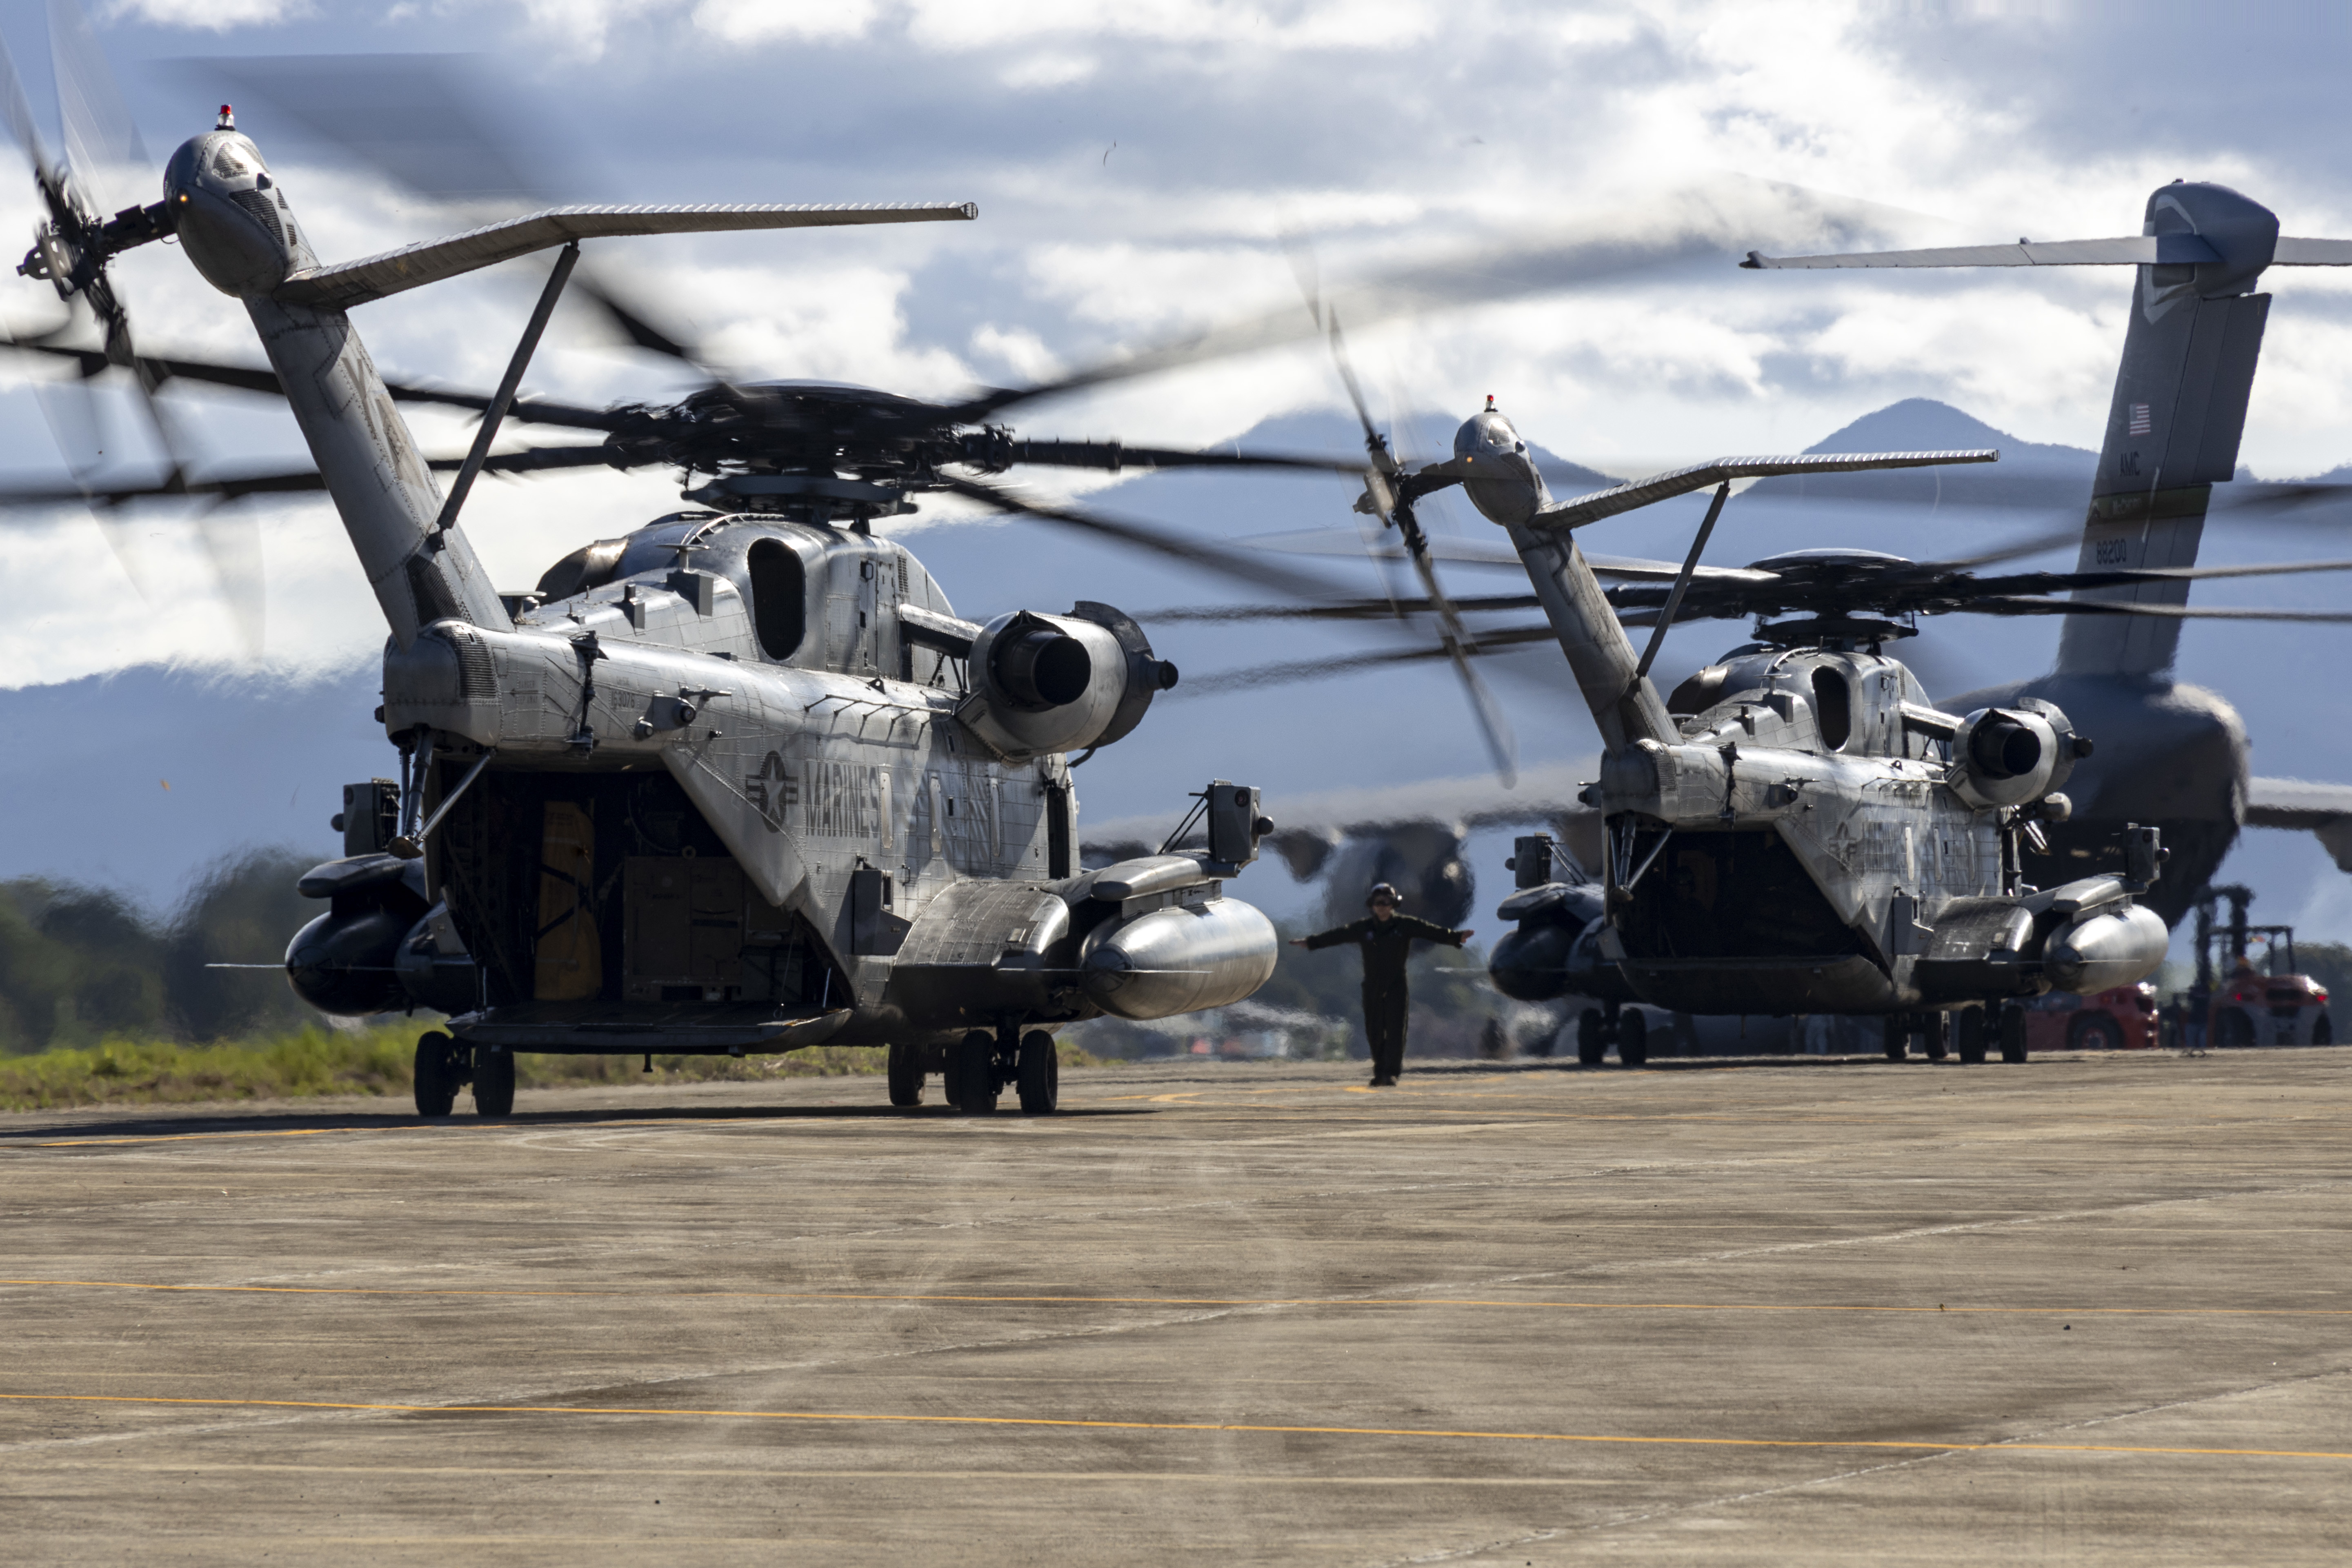 U.S. Marine Corps CH-53E Super Stallions attached to Marine Medium Tiltrotor Squadron (VMM) 163 (Reinforced), Marine Aircraft Group 16, 3rd Marine Aircraft Wing, taxi on the runway at Antonio Bautista Air Base